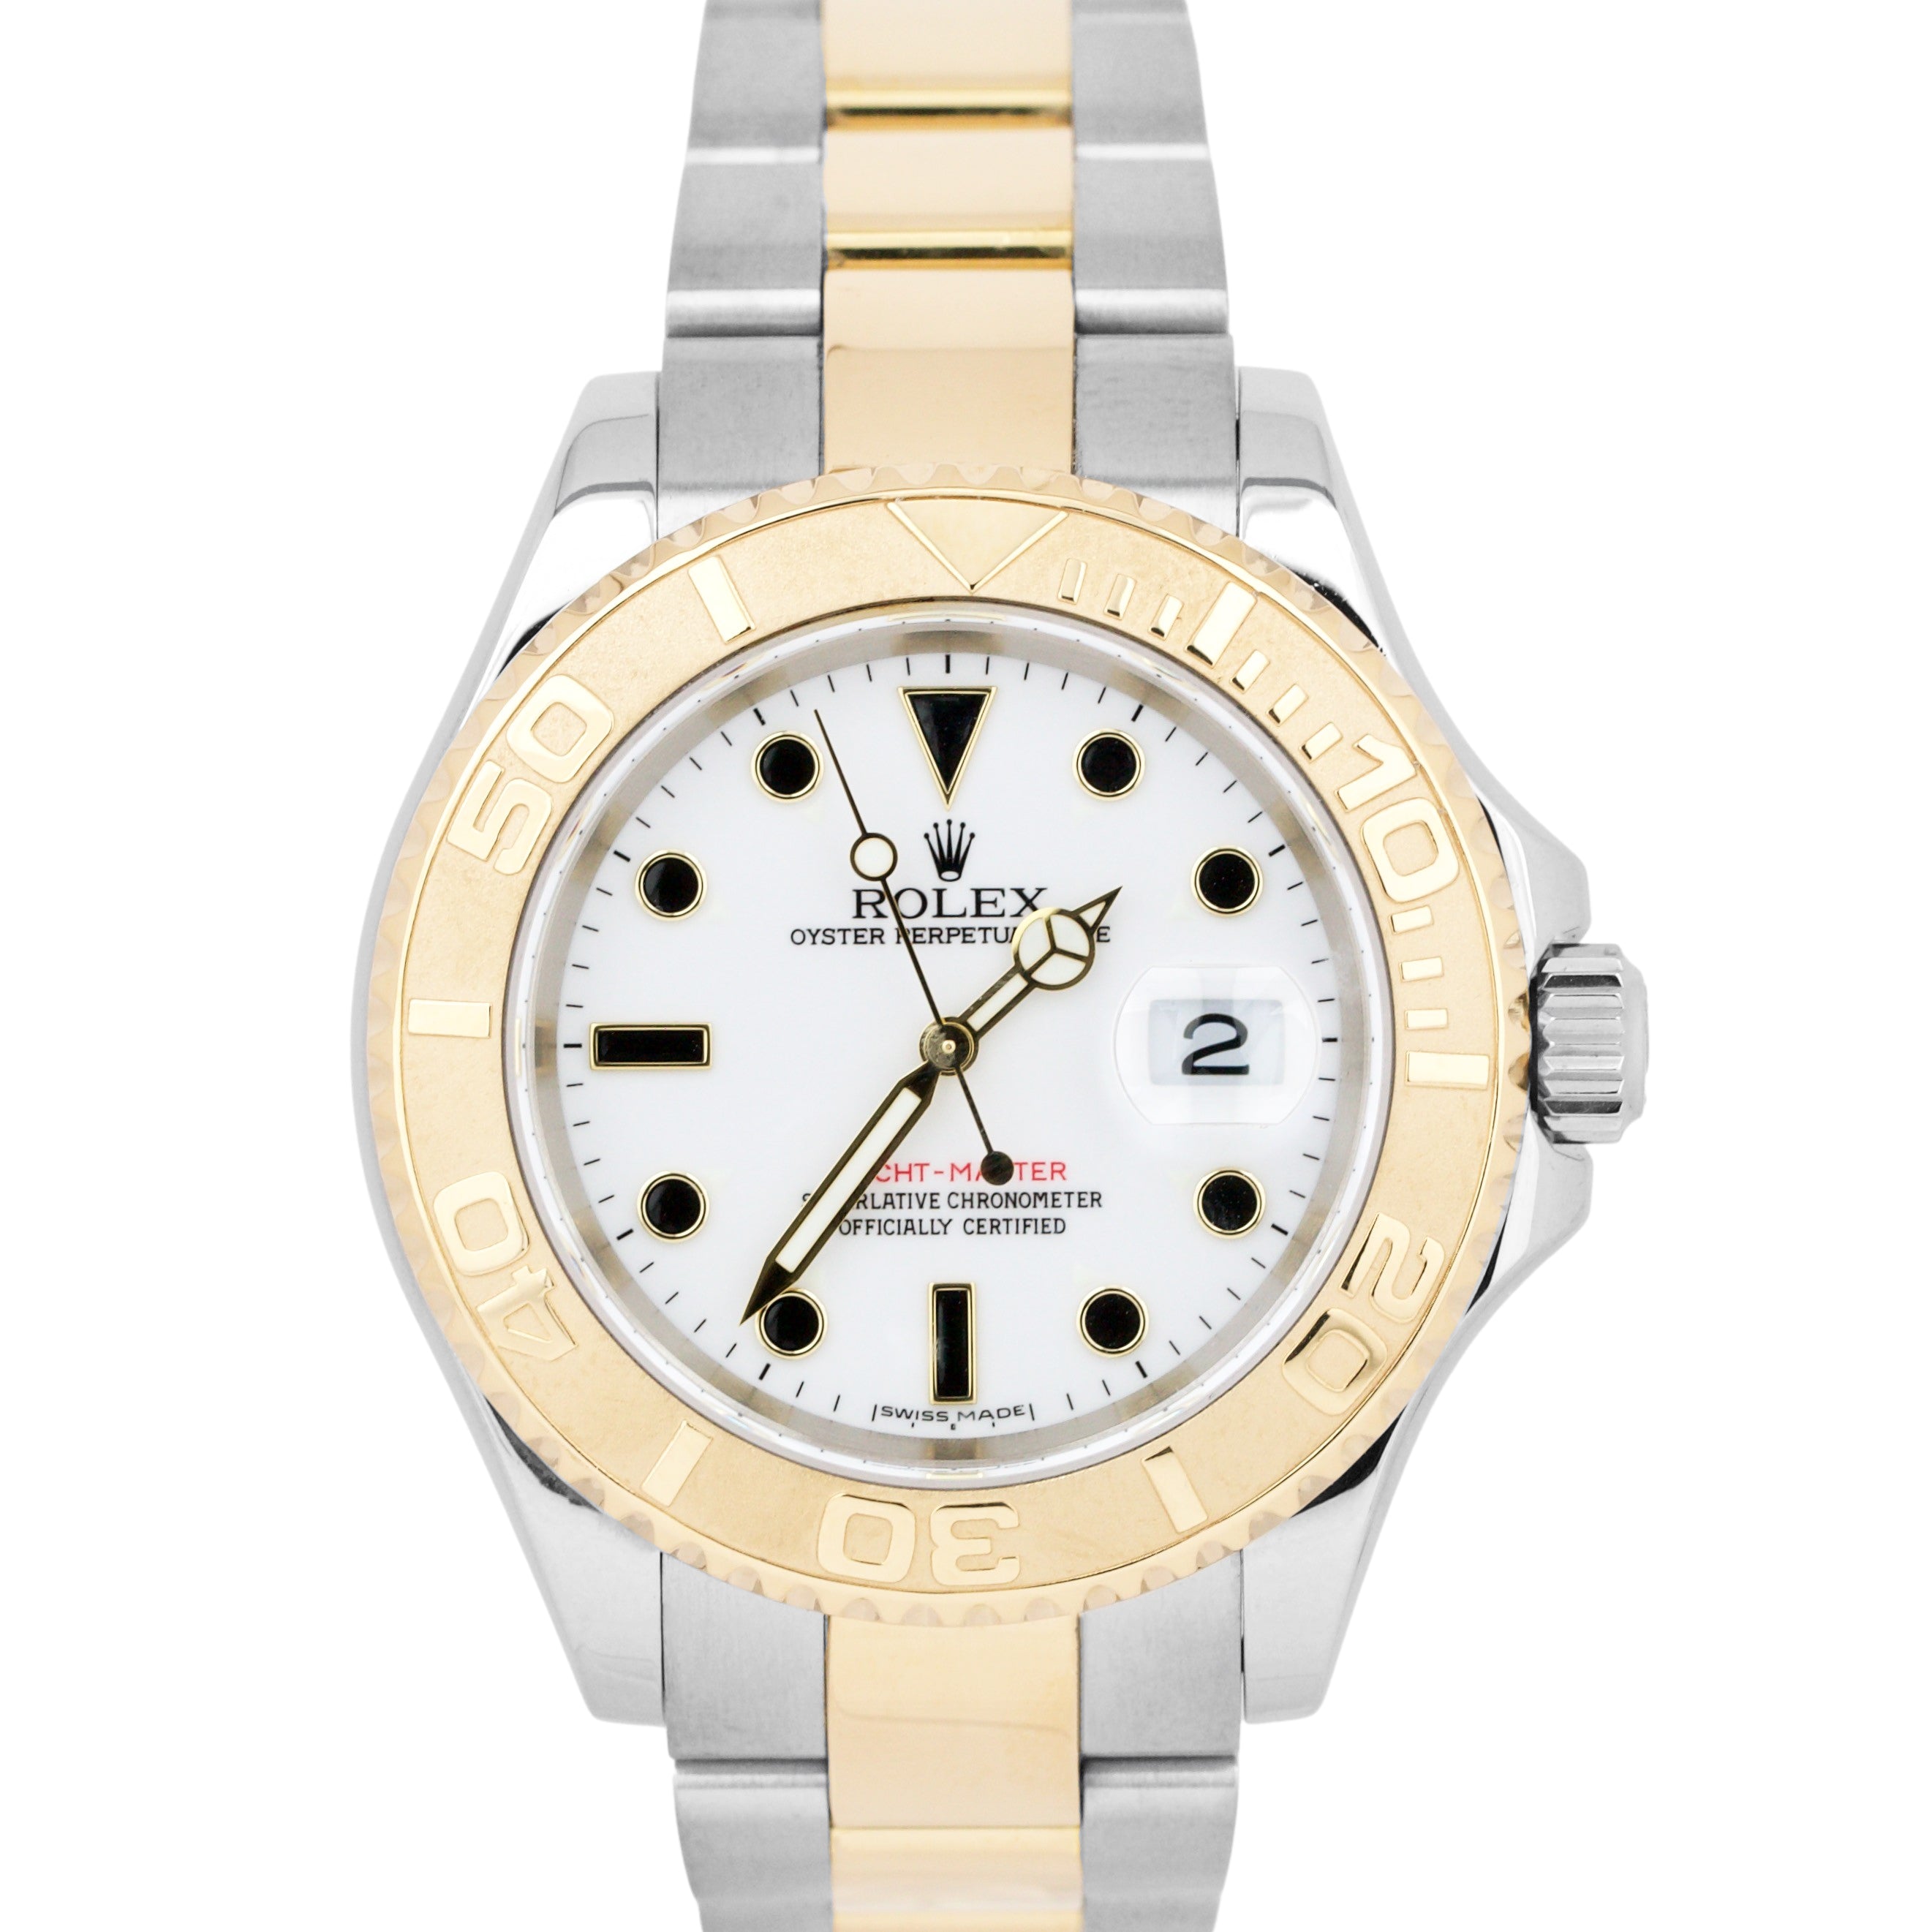 Rolex Yacht-Master 16623 White 18K Two Tone Yellow Gold 40mm Steel Date Watch